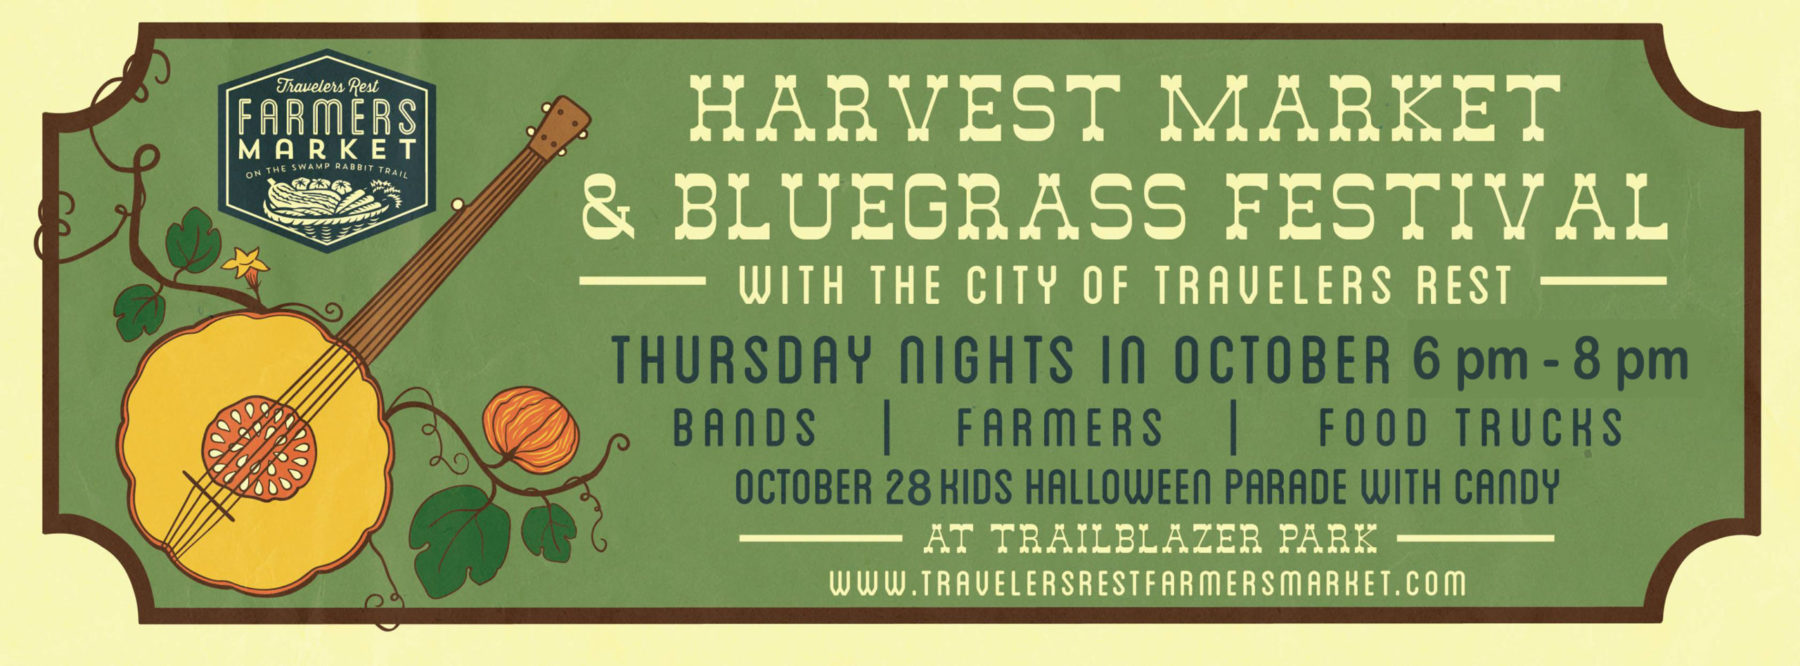 Fall Bluegrass and Harvest Market Travelers Rest